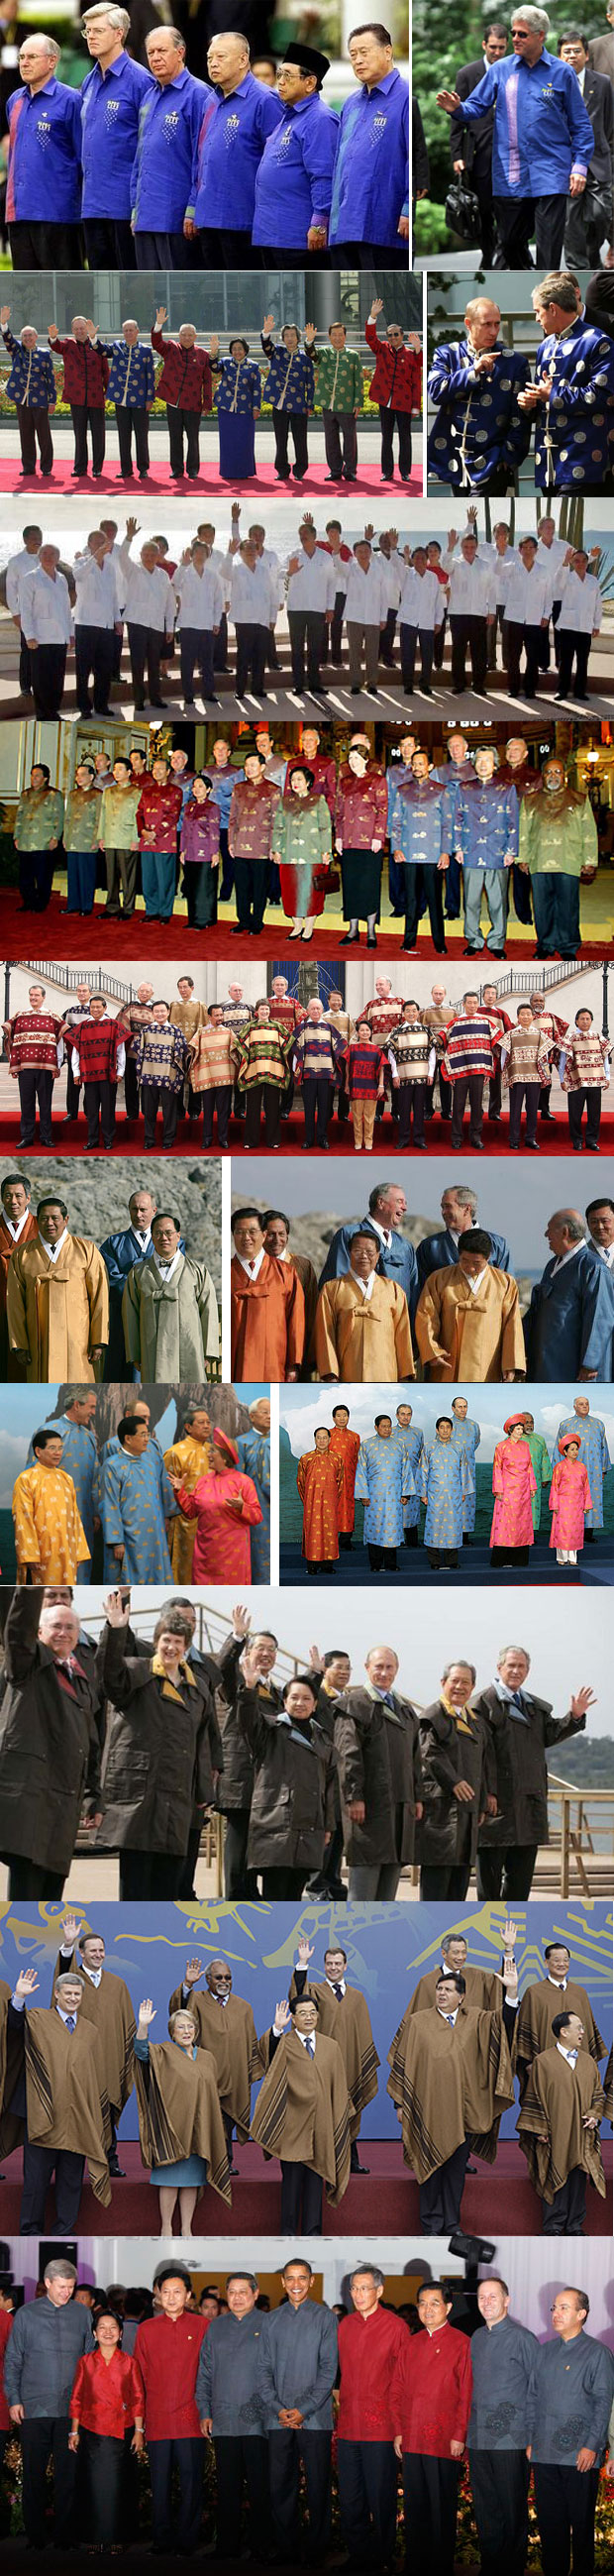 APEC Leaders Costumes - Silly Shirts photo